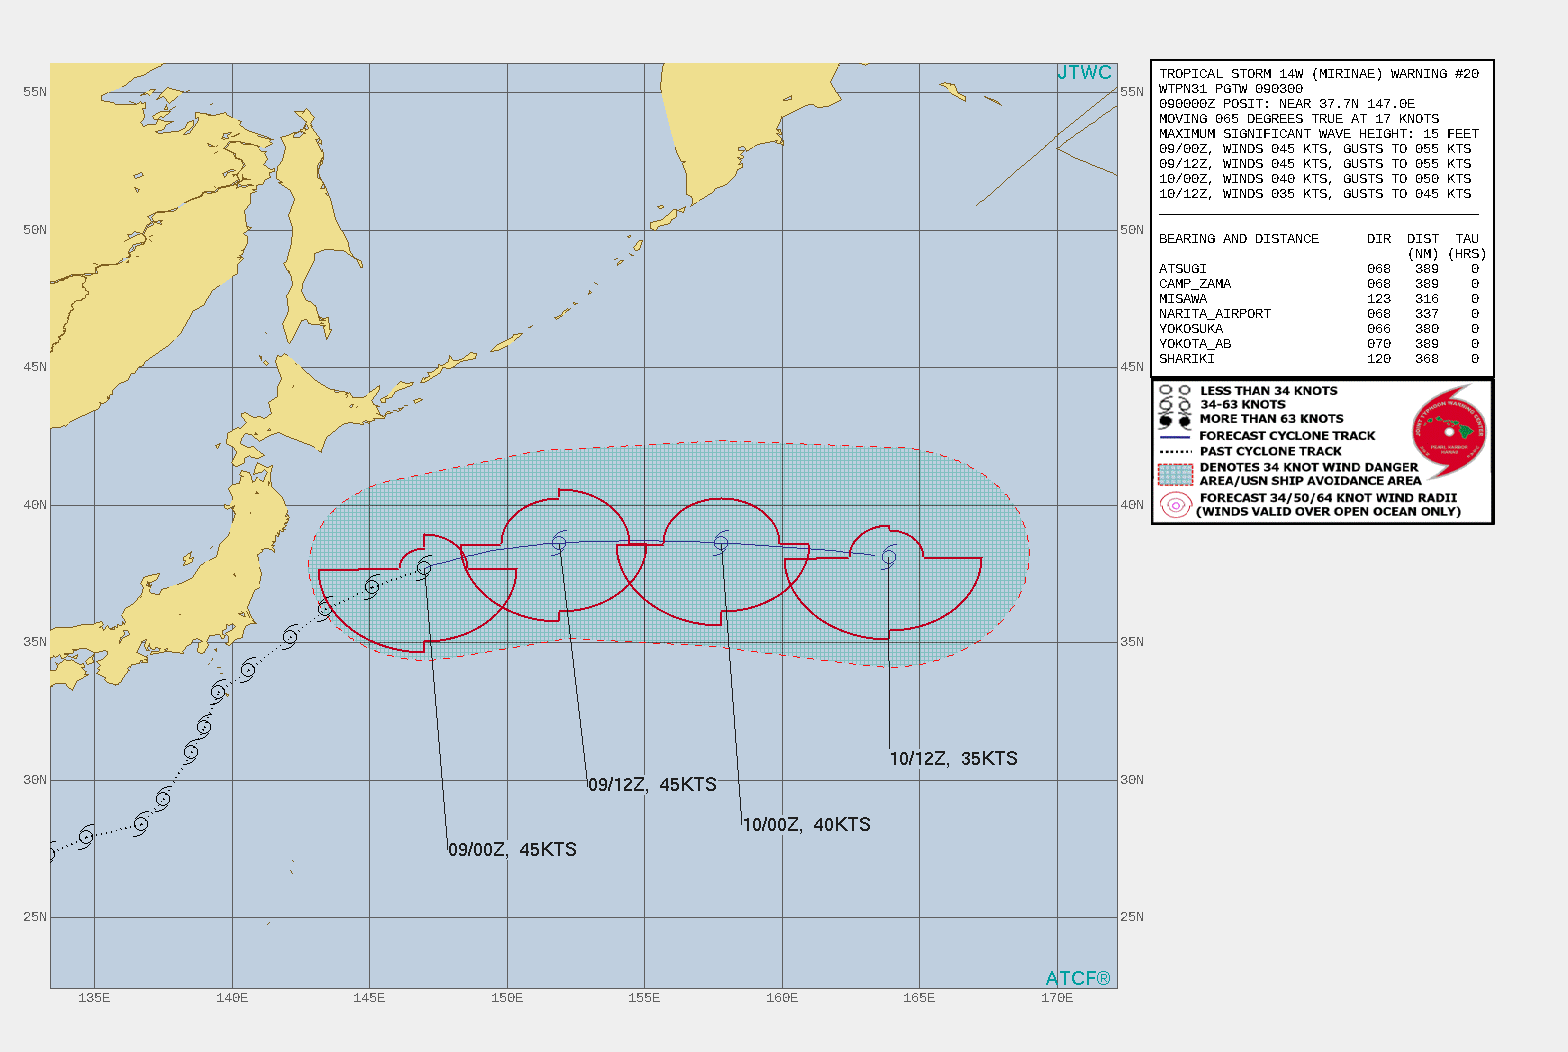 TS 14W(MIRINAE). WARNING 20 ISSUED AT 09/03UTC.THERE ARE NO SIGNIFICANT CHANGES TO THE FORECAST FROM THE PREVIOUS WARNING.  FORECAST DISCUSSION: UNDER THE STEERING INFLUENCE OF THE SUBTROPICAL RIDGE, TS MIRINAE WILL CONTINUE ON ITS CURRENT TRACK, THEN TURN EASTWARD AFTER 12H. THE MARGINALLY UNFAVORABLE ENVIRONMENT WILL CONTINUE  TO DEGRADE WITH INCREASING VERTICAL WIND SHEAR (25-35 KNOTS) AND COOLING SSTS (24-25 DEGREES CELSIUS) WILL GRADUALLY ERODE THE SYSTEM THROUGH THE  REMAINDER OF THE FORECAST. BY 24H, THE SYSTEM WILL BEGIN EXTRA- TROPICAL TRANSITION AND FULLY TRANSFORM INTO A COLD CORE LOW BY 36H.